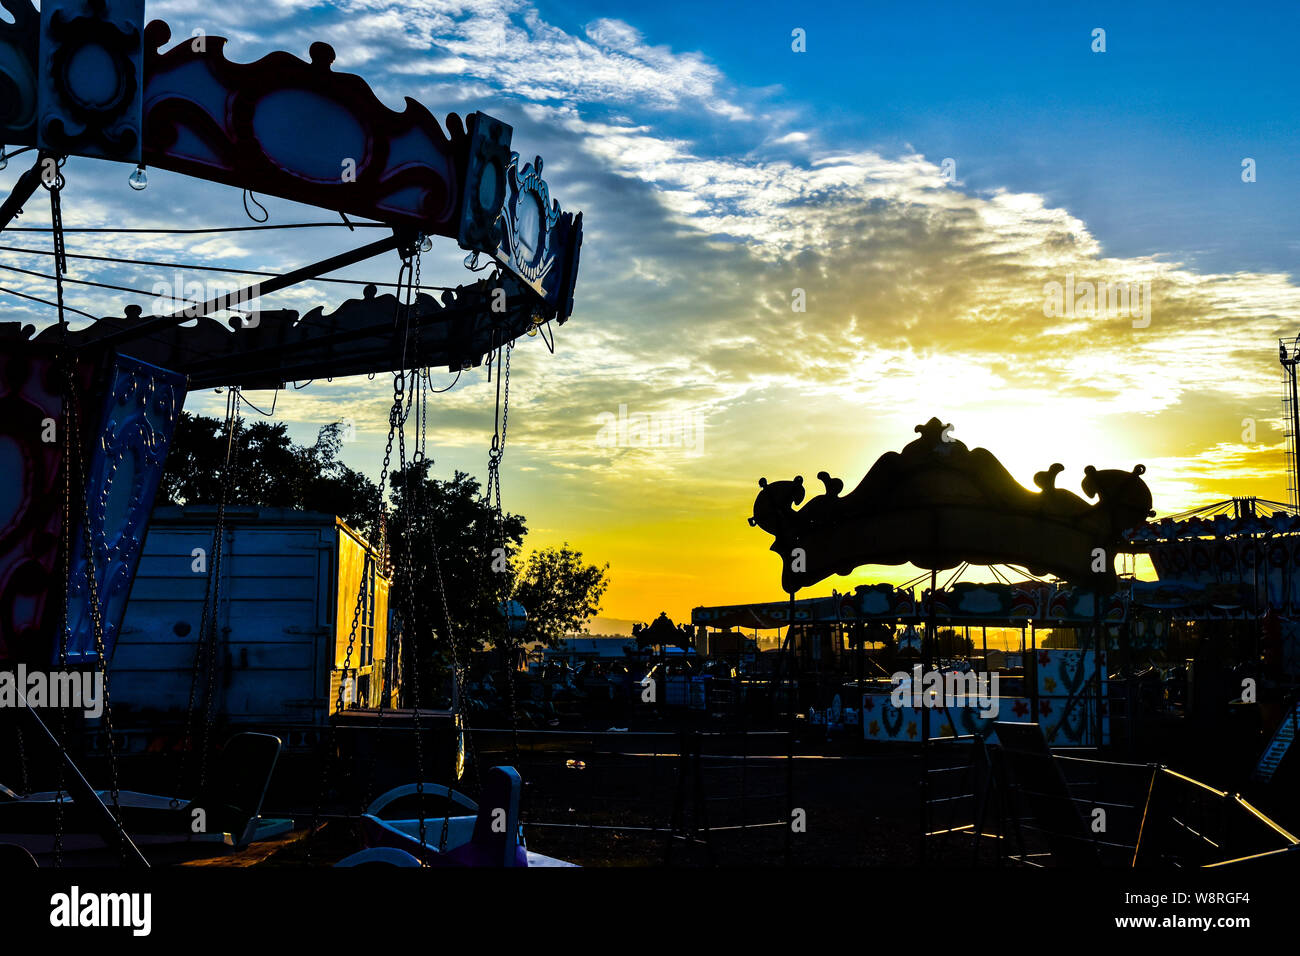 Early morning golden glow at fun fair with great silhouette, dramatic skies and a selection of rides against the horizon Stock Photo